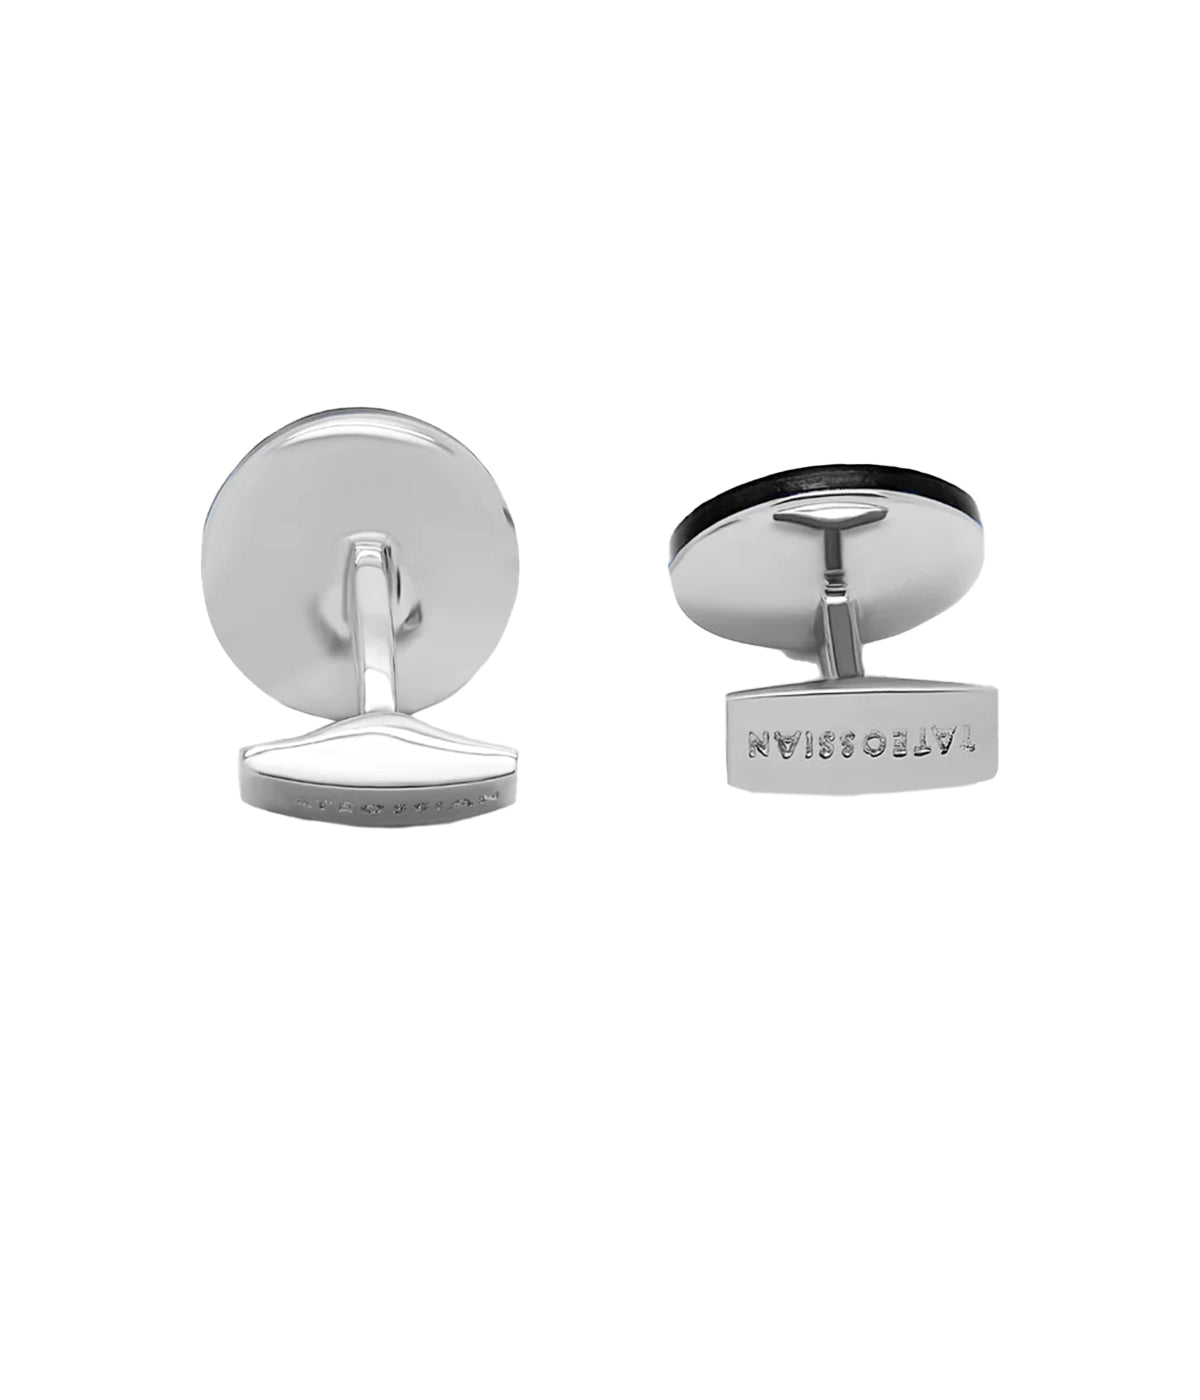 Round Mother of Pearl Cufflinks in Silver